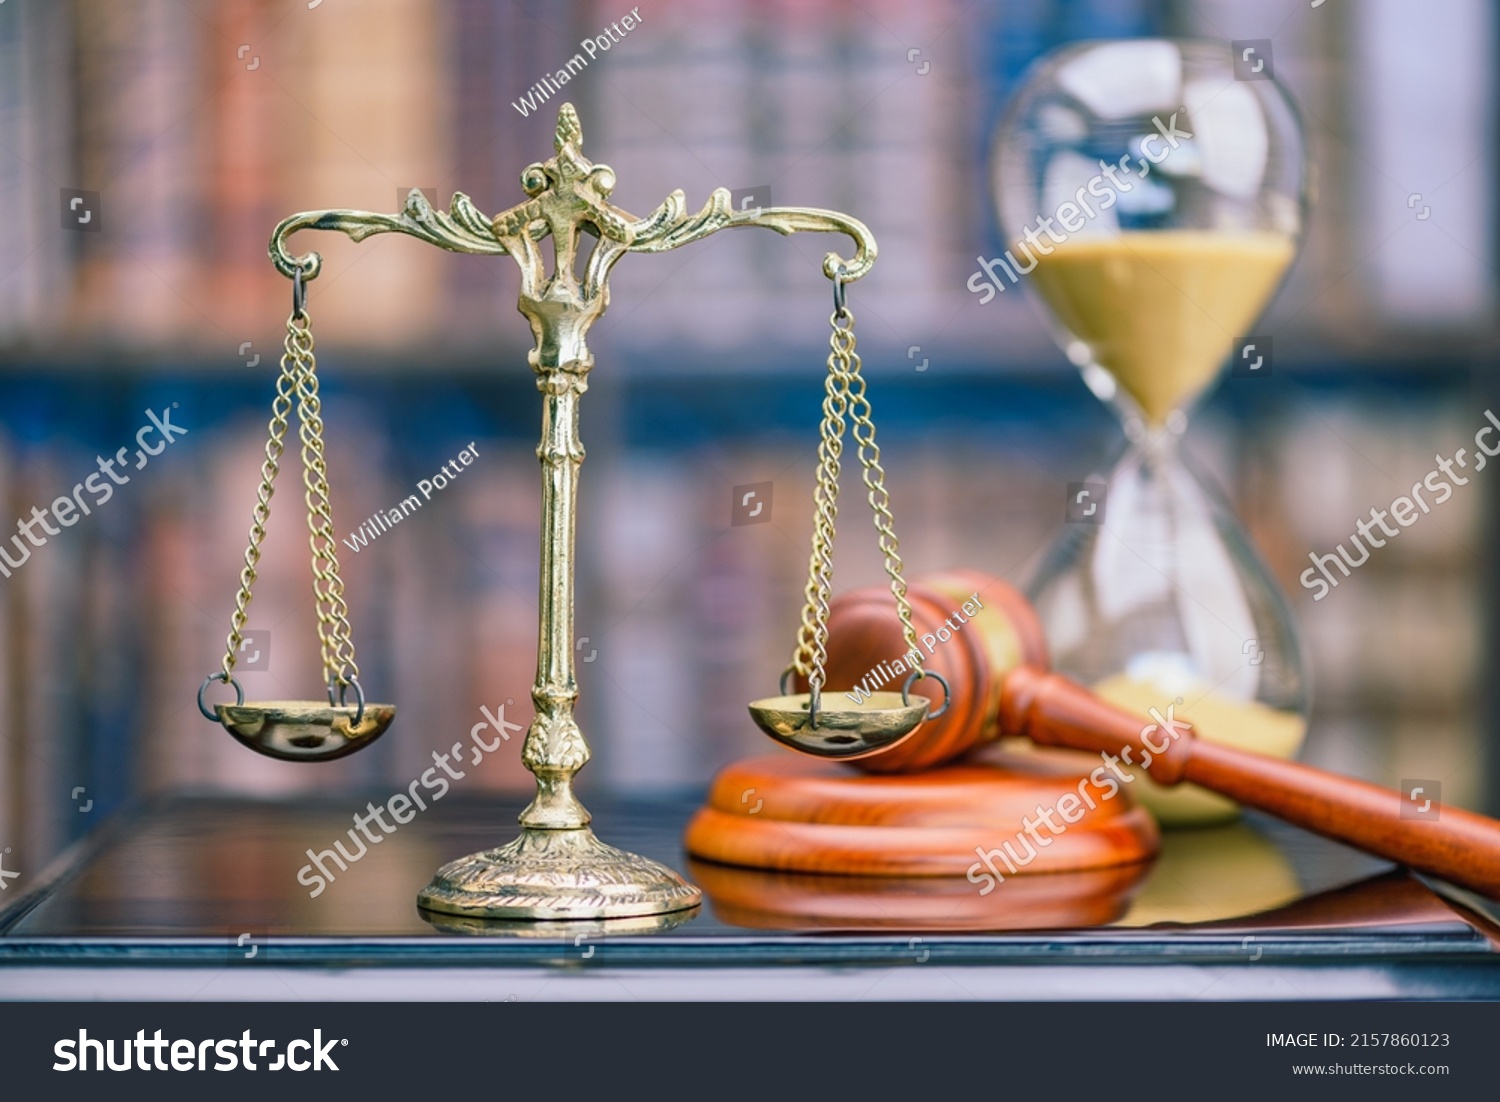 Legal office of lawyers, justice and law concept : Retro balance scale of justice on a desk in a courtroom, depicting giving fair and objective consideration to all evidence, without showing bias. #2157860123